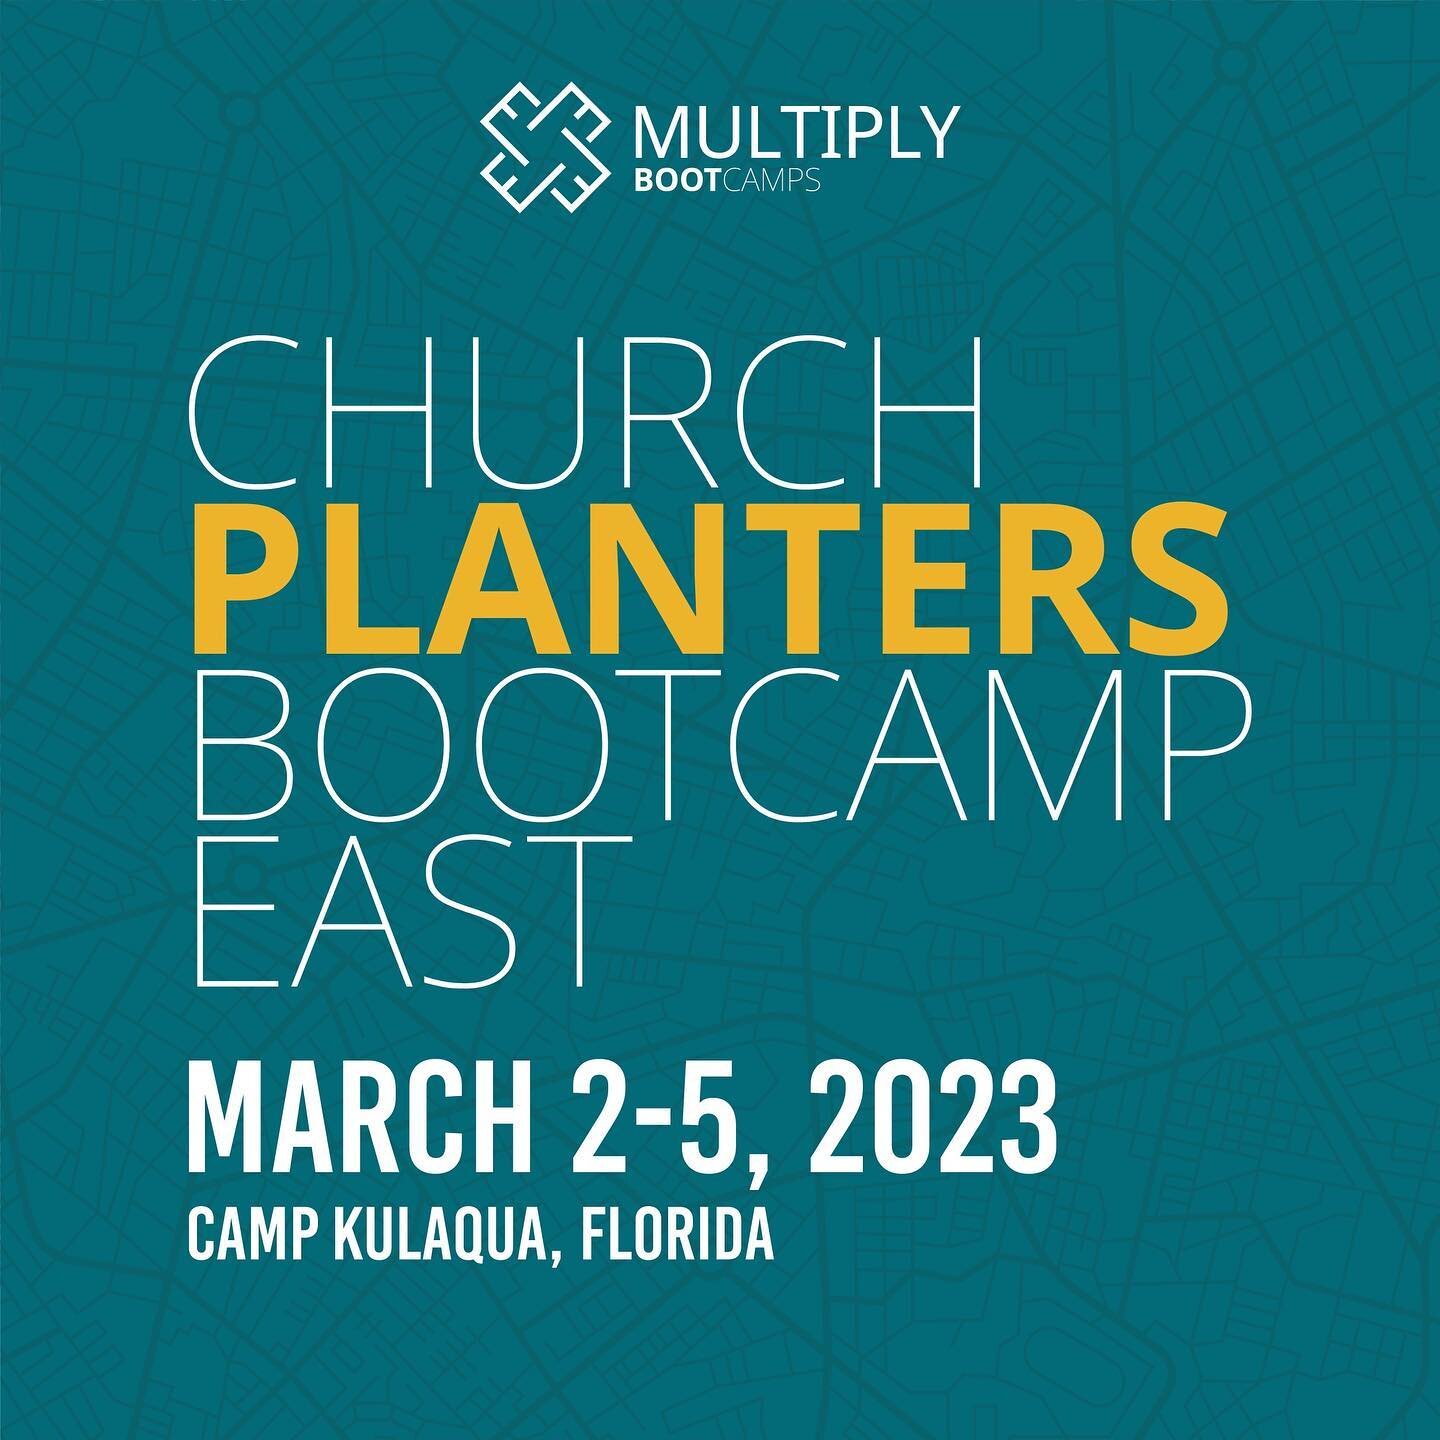 Register to the VIII North American Division Church Planters BootCamp East is taking place on March 2-5, 2023, in Camp Kulaqua, Florida, on February 1, 2023.

The three-day experience has been designed and created exclusively for Church Planters, Pas